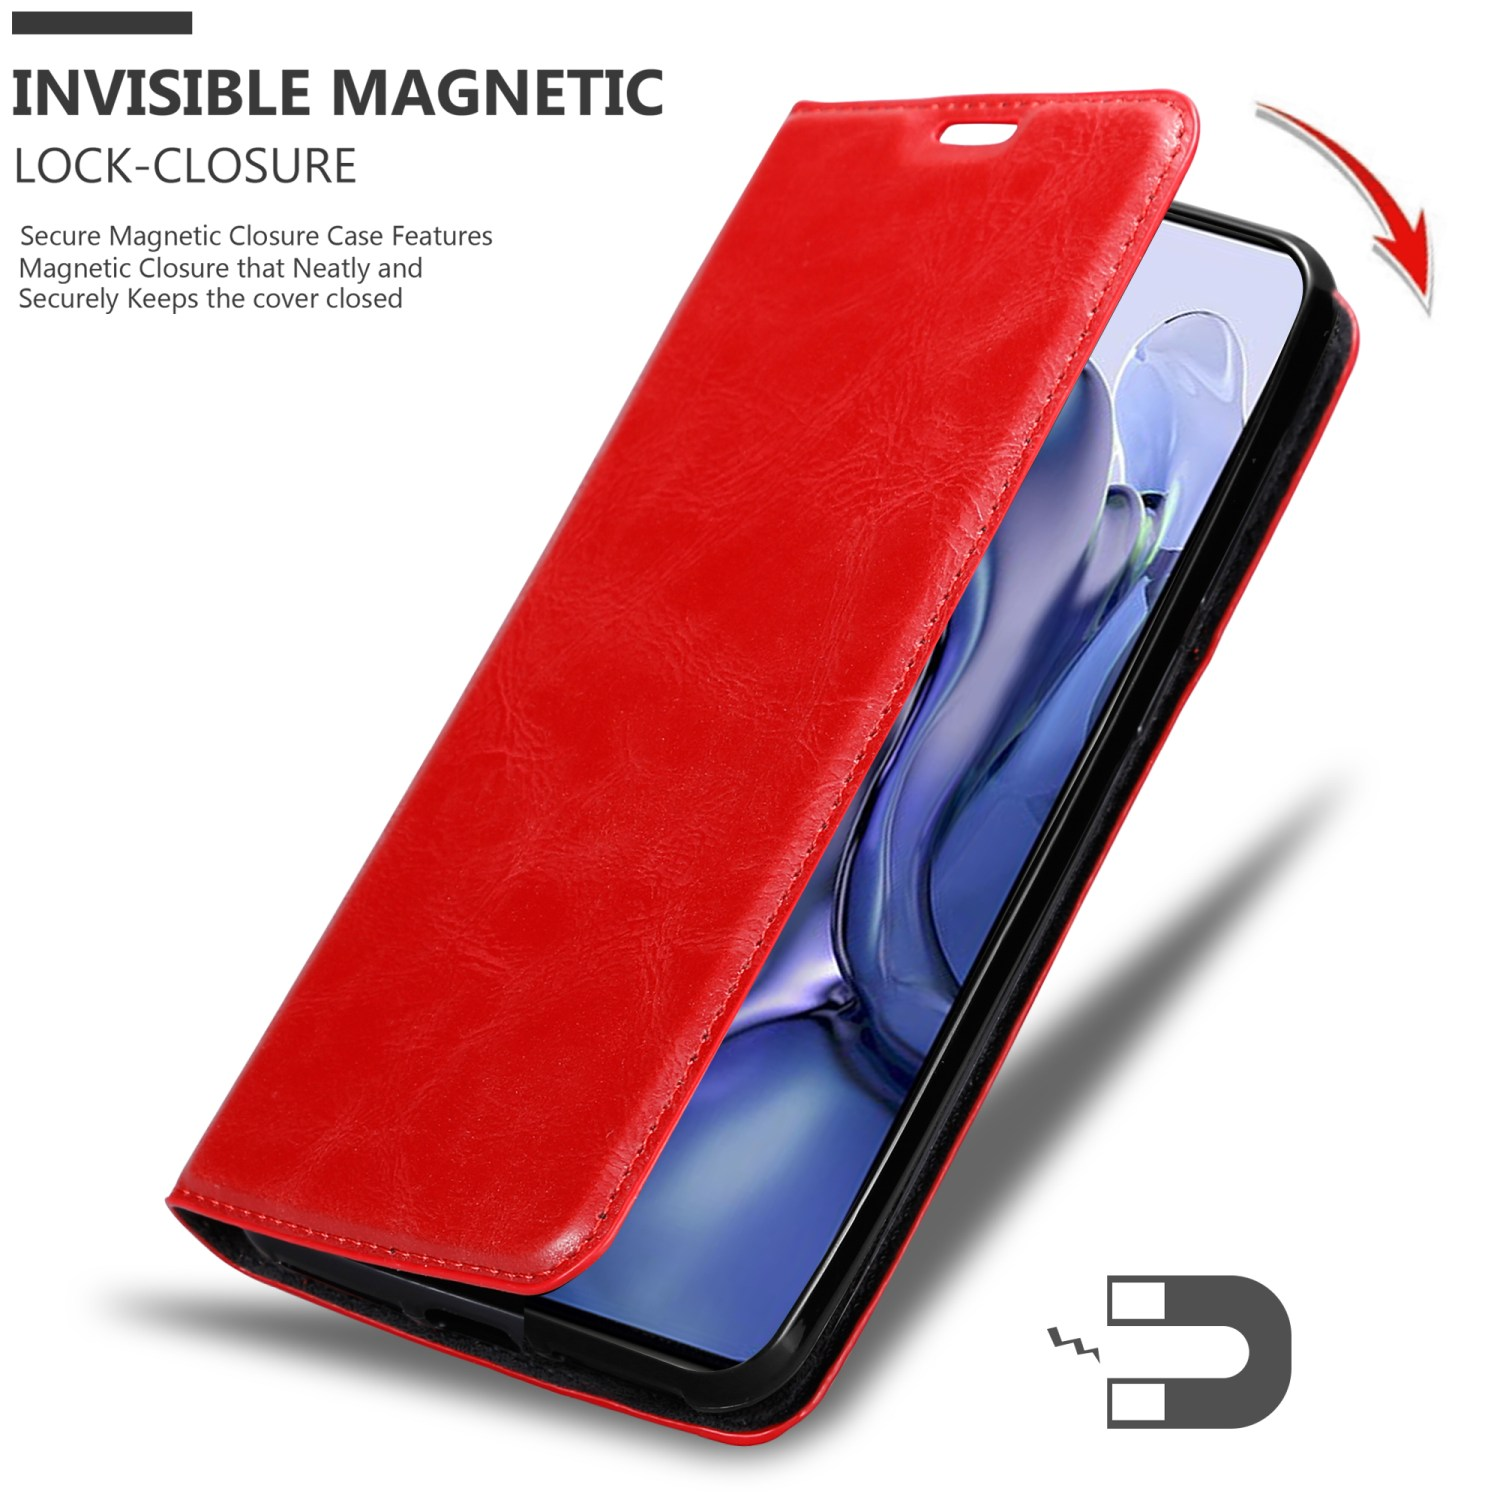 CADORABO Book Hülle Invisible Magnet, PRO, 11T 11T ROT Bookcover, Xiaomi, APFEL 